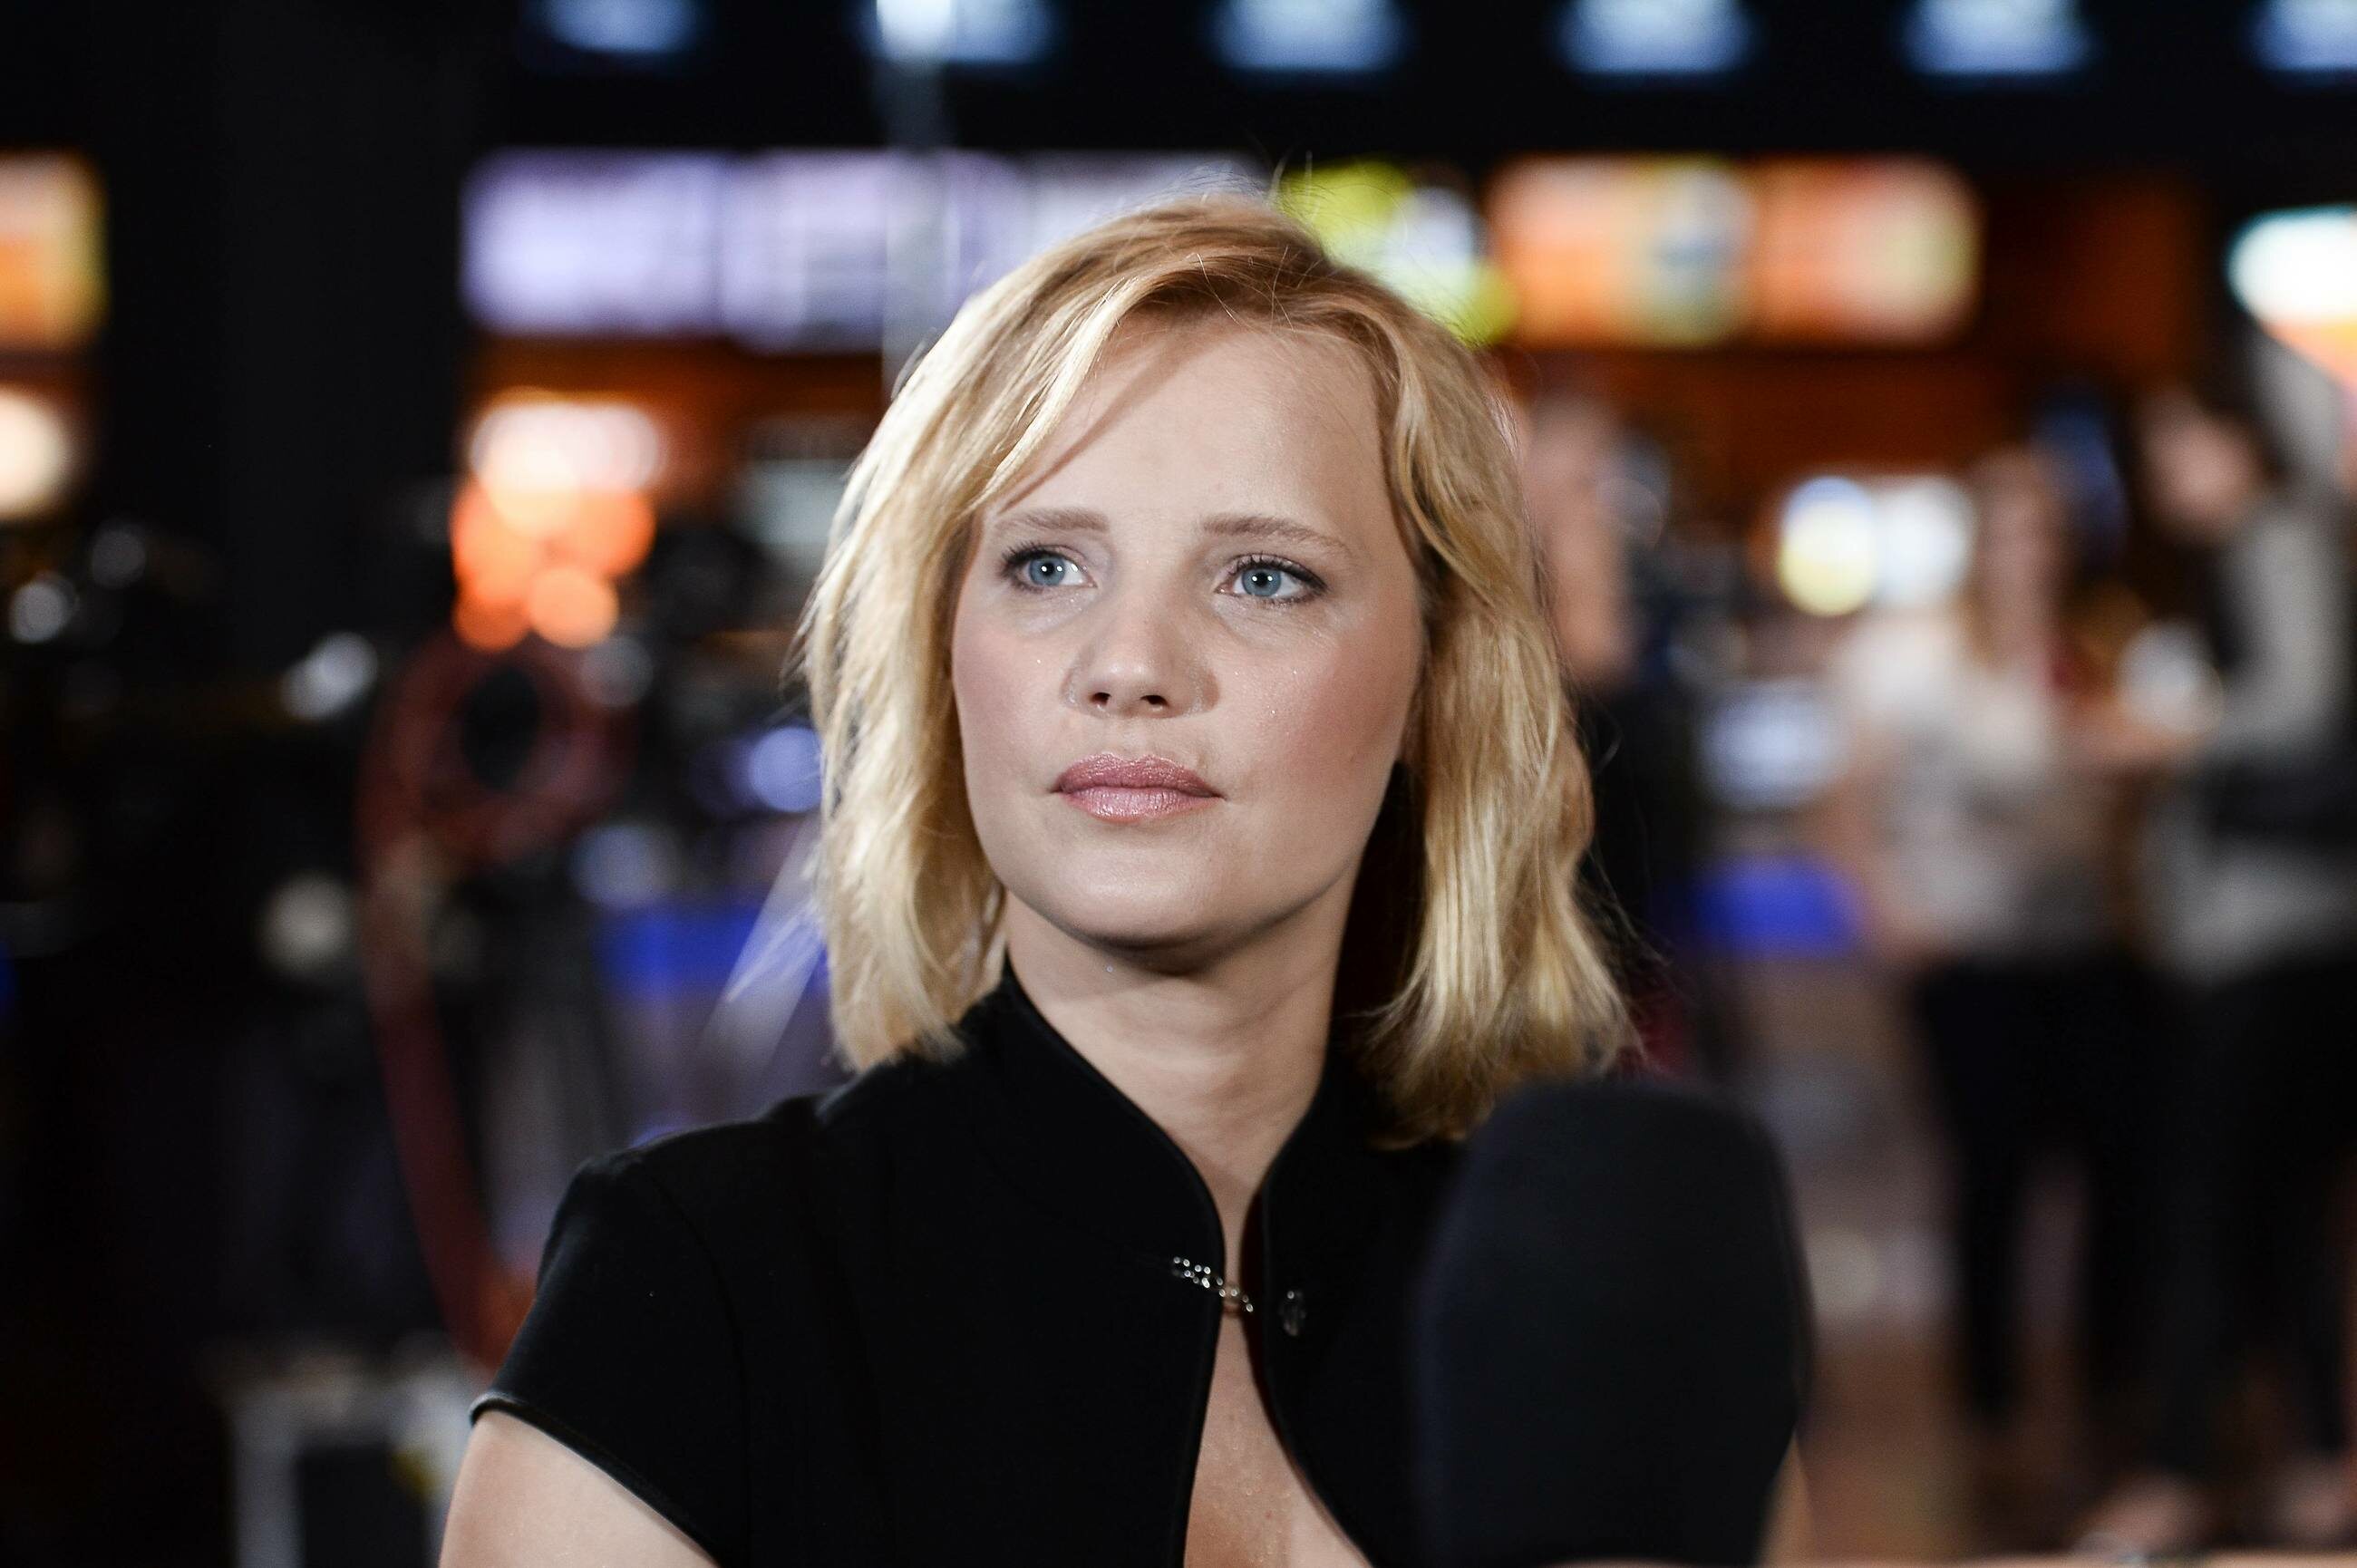 Joanna kulig is a singer and film and theatre actress, born on 24th june 19...